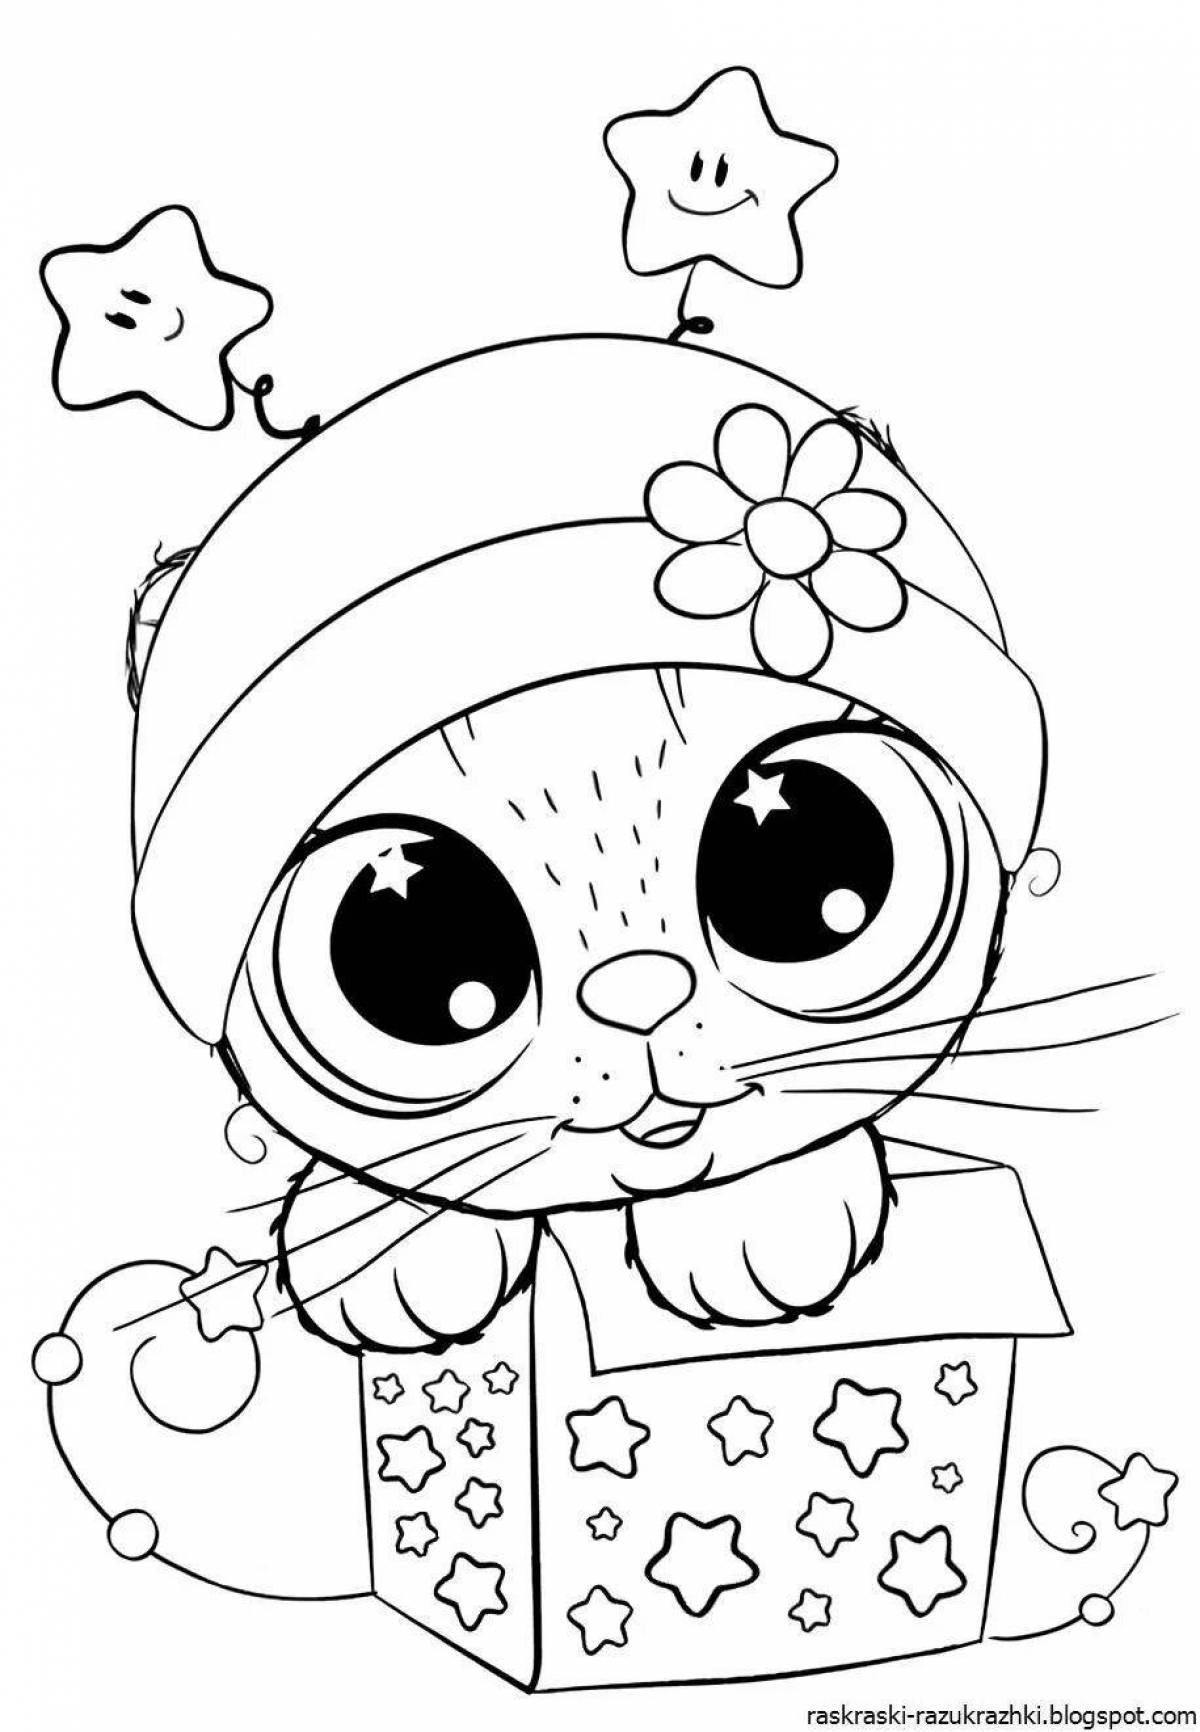 Great coloring book for girls 12 years old, cute cats